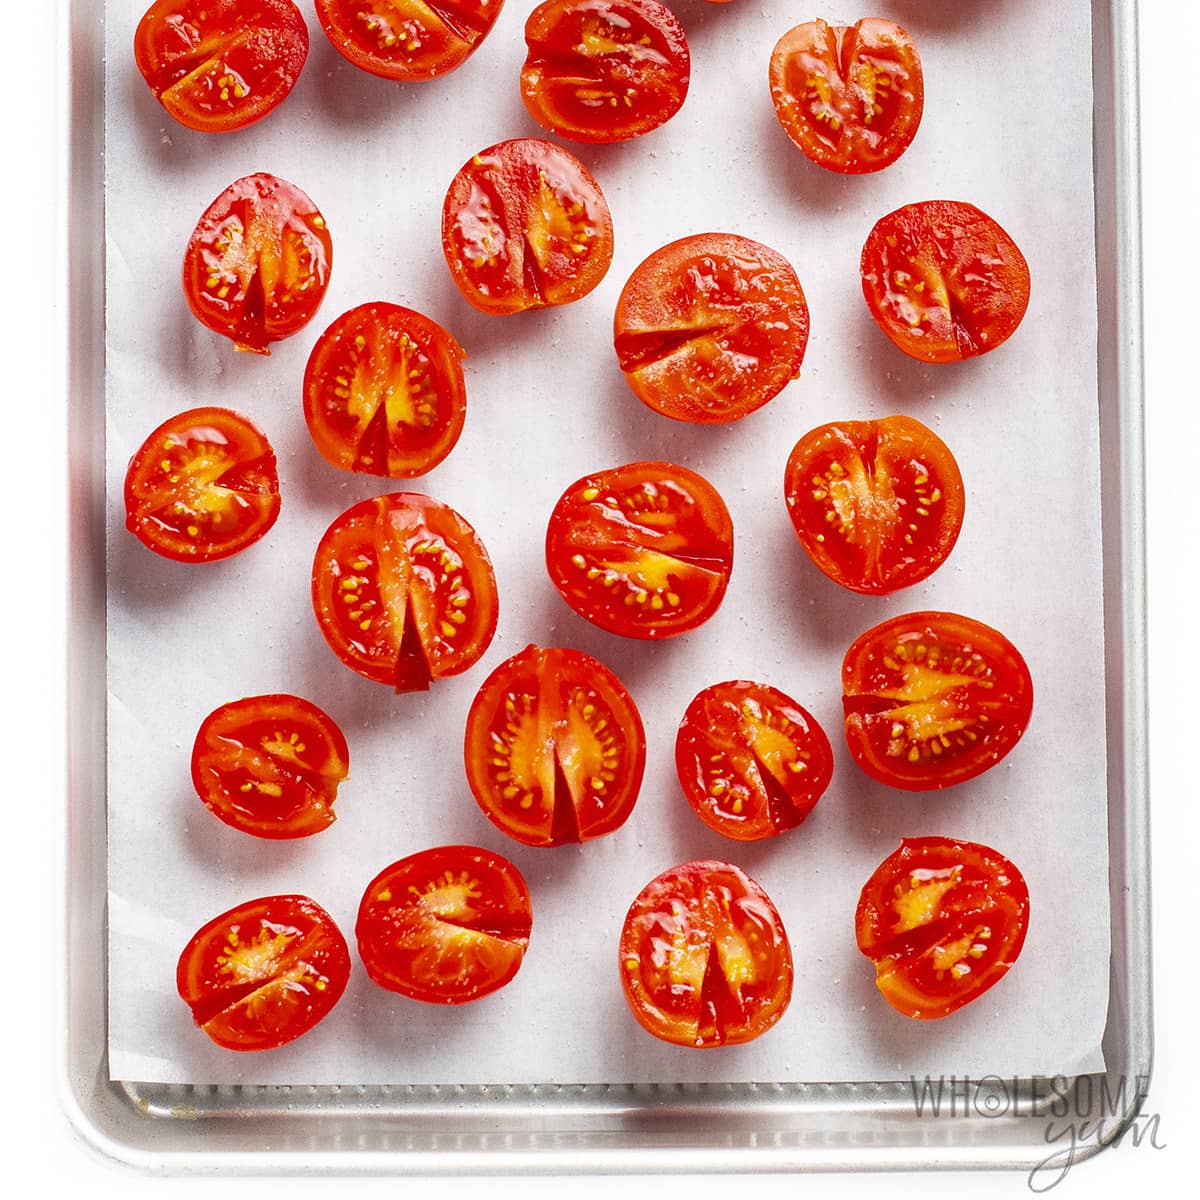 Raw tomatoes on a baking sheet.